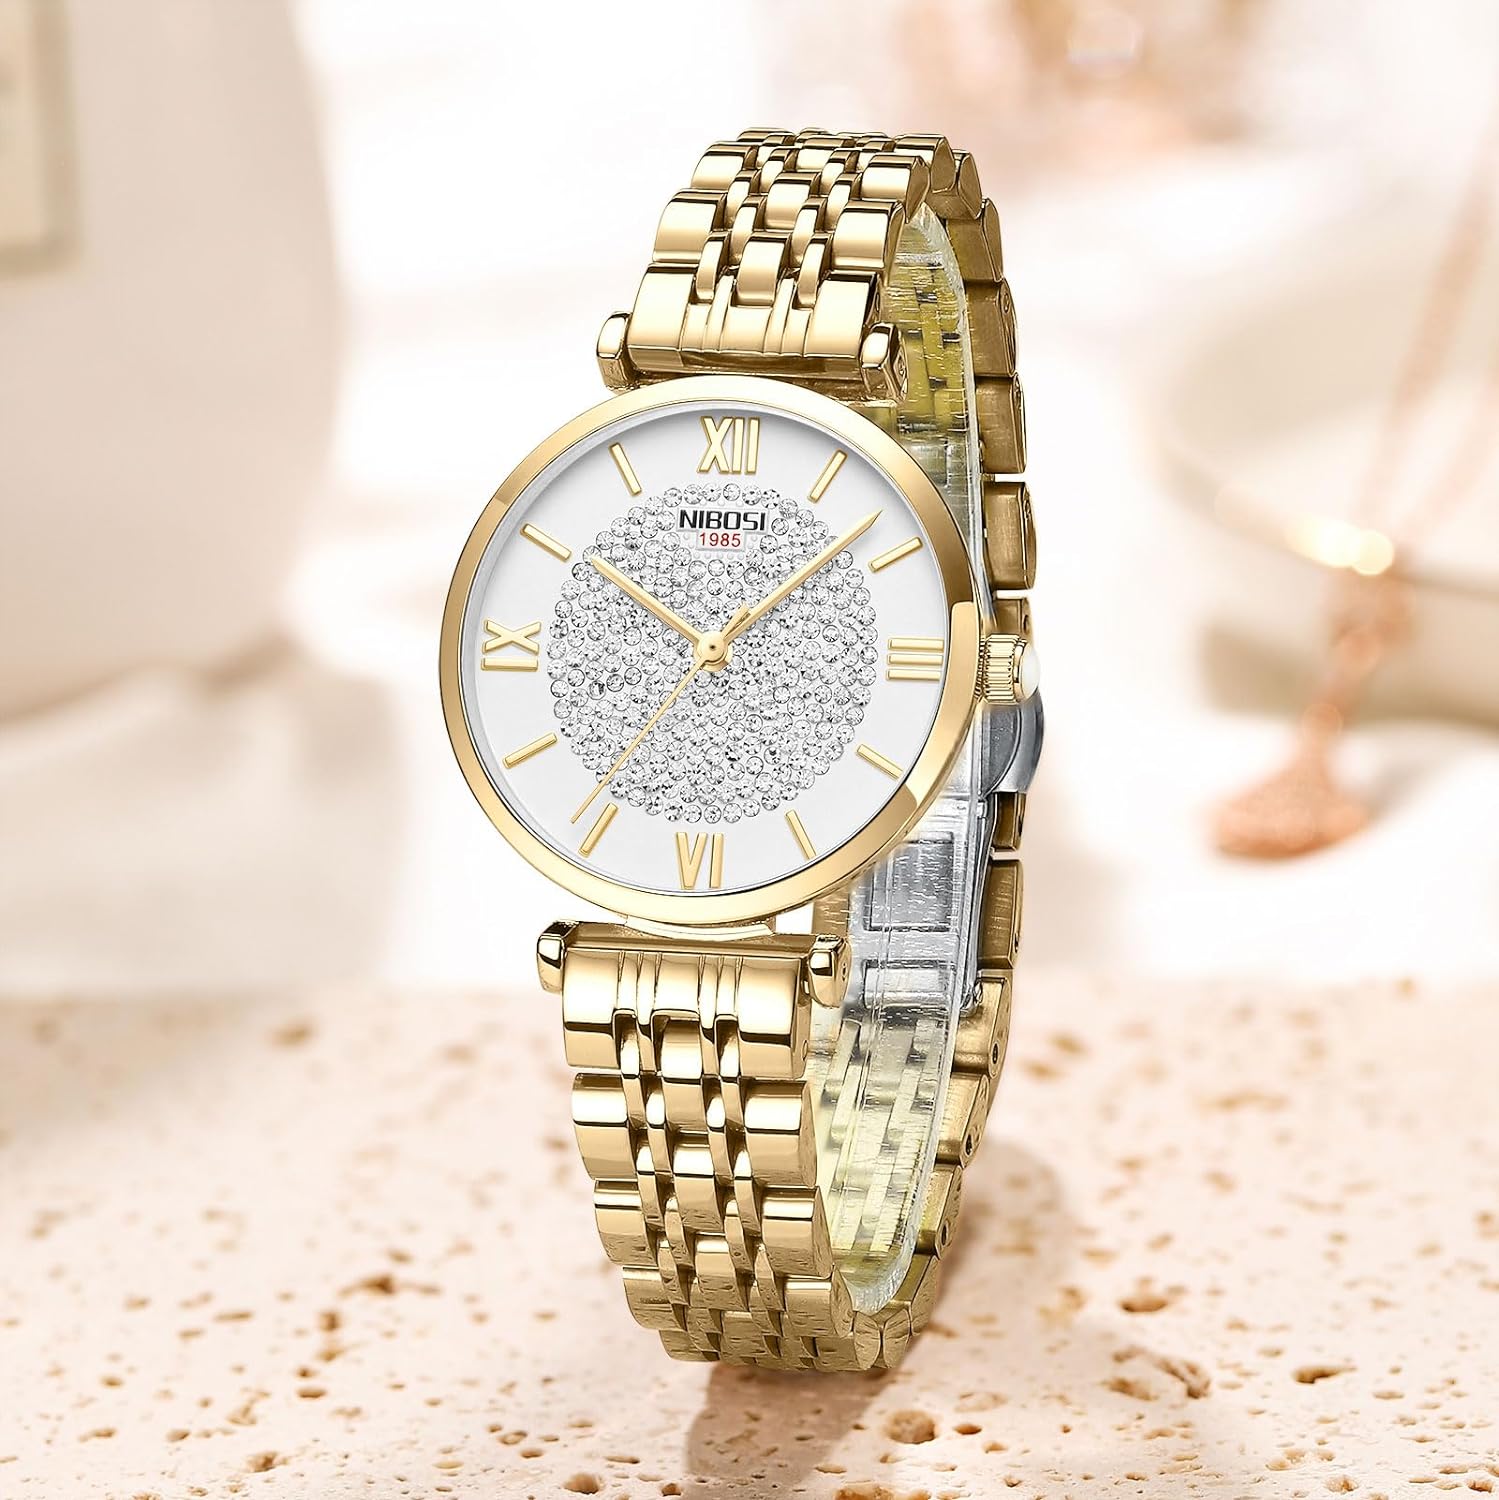 NIBOSI Women Watches Premium Analogue Business Wrist Watches for Women Rose Gold Dial Watch with Stylish Diamond Studded Watches